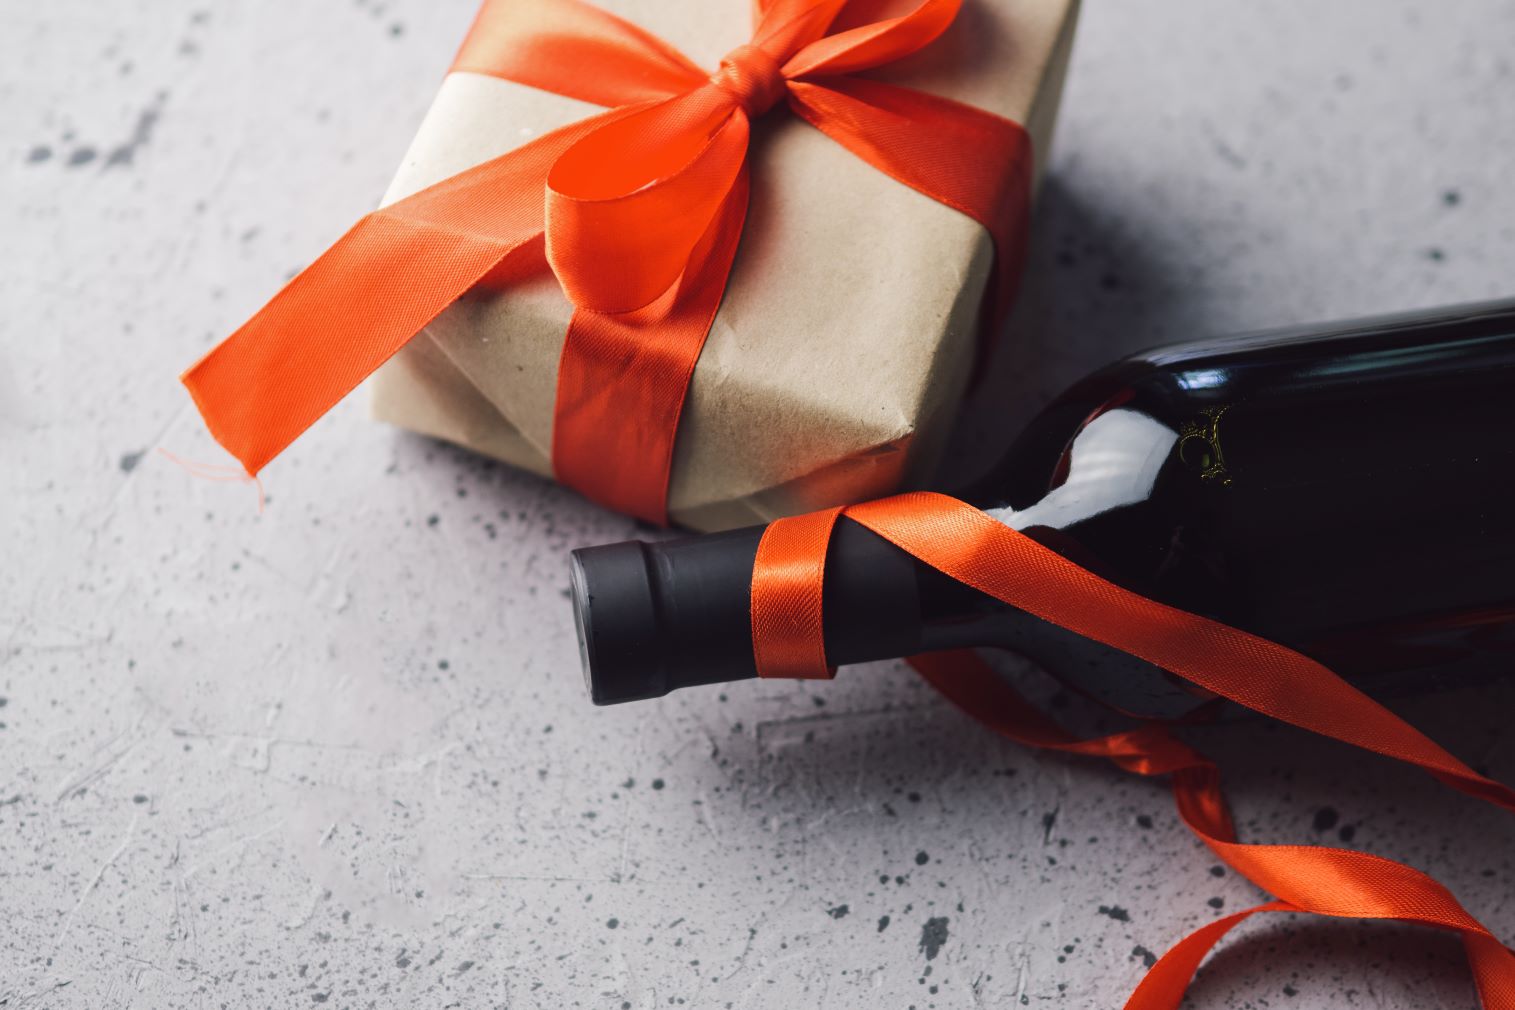 The Best Alcohol Gift Sets for the Holidays